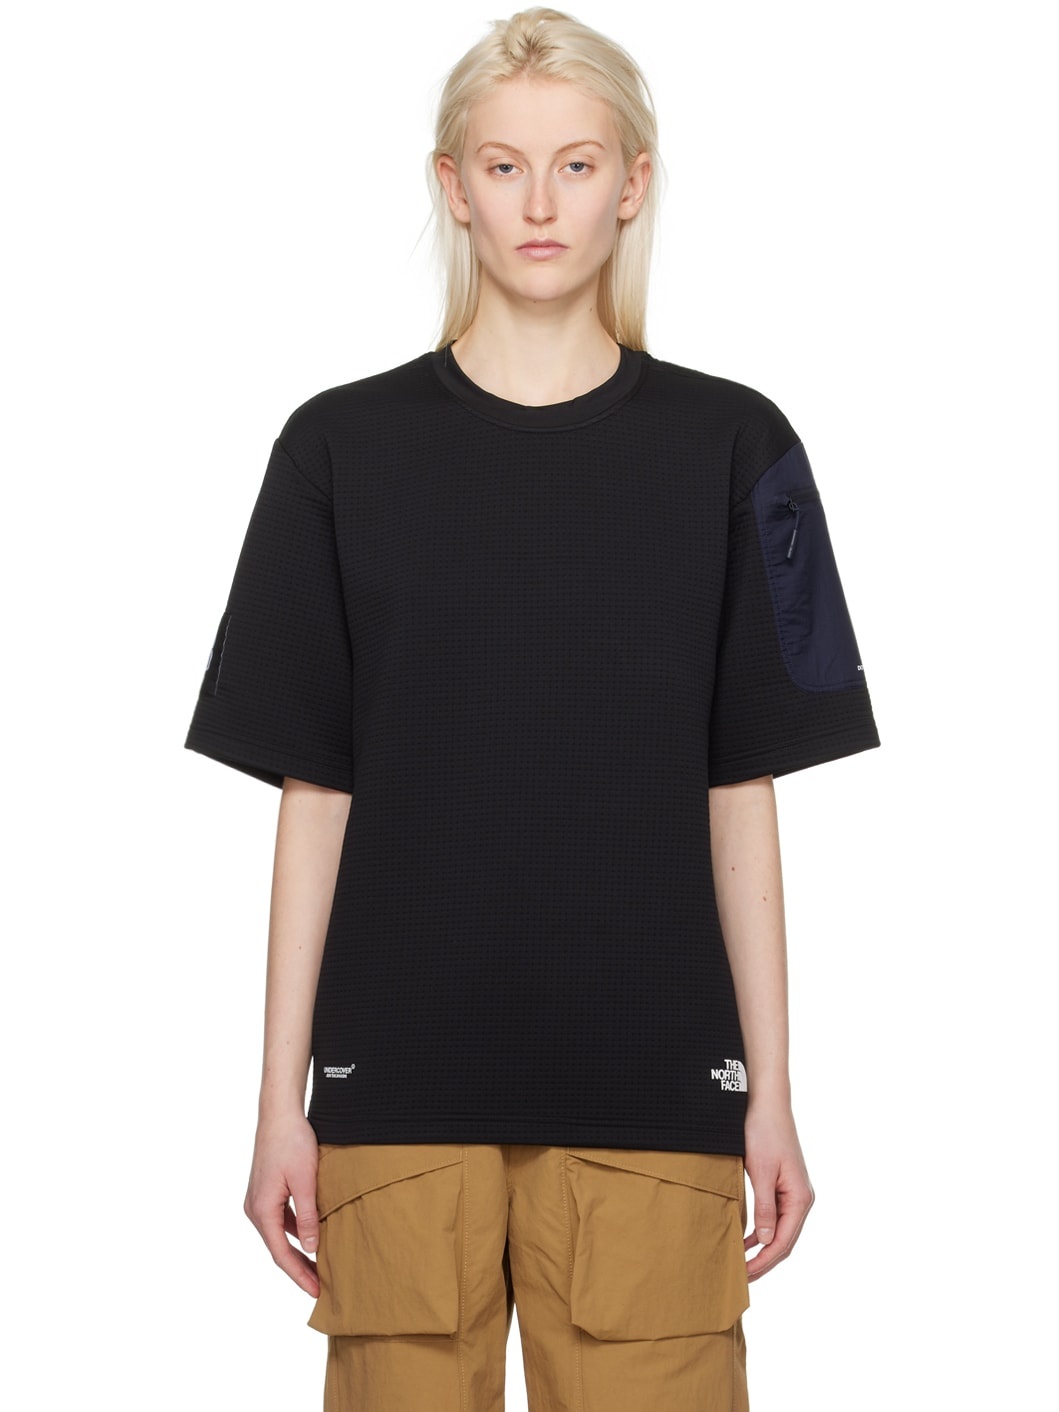 Black The North Face Edition T-Shirt - 1